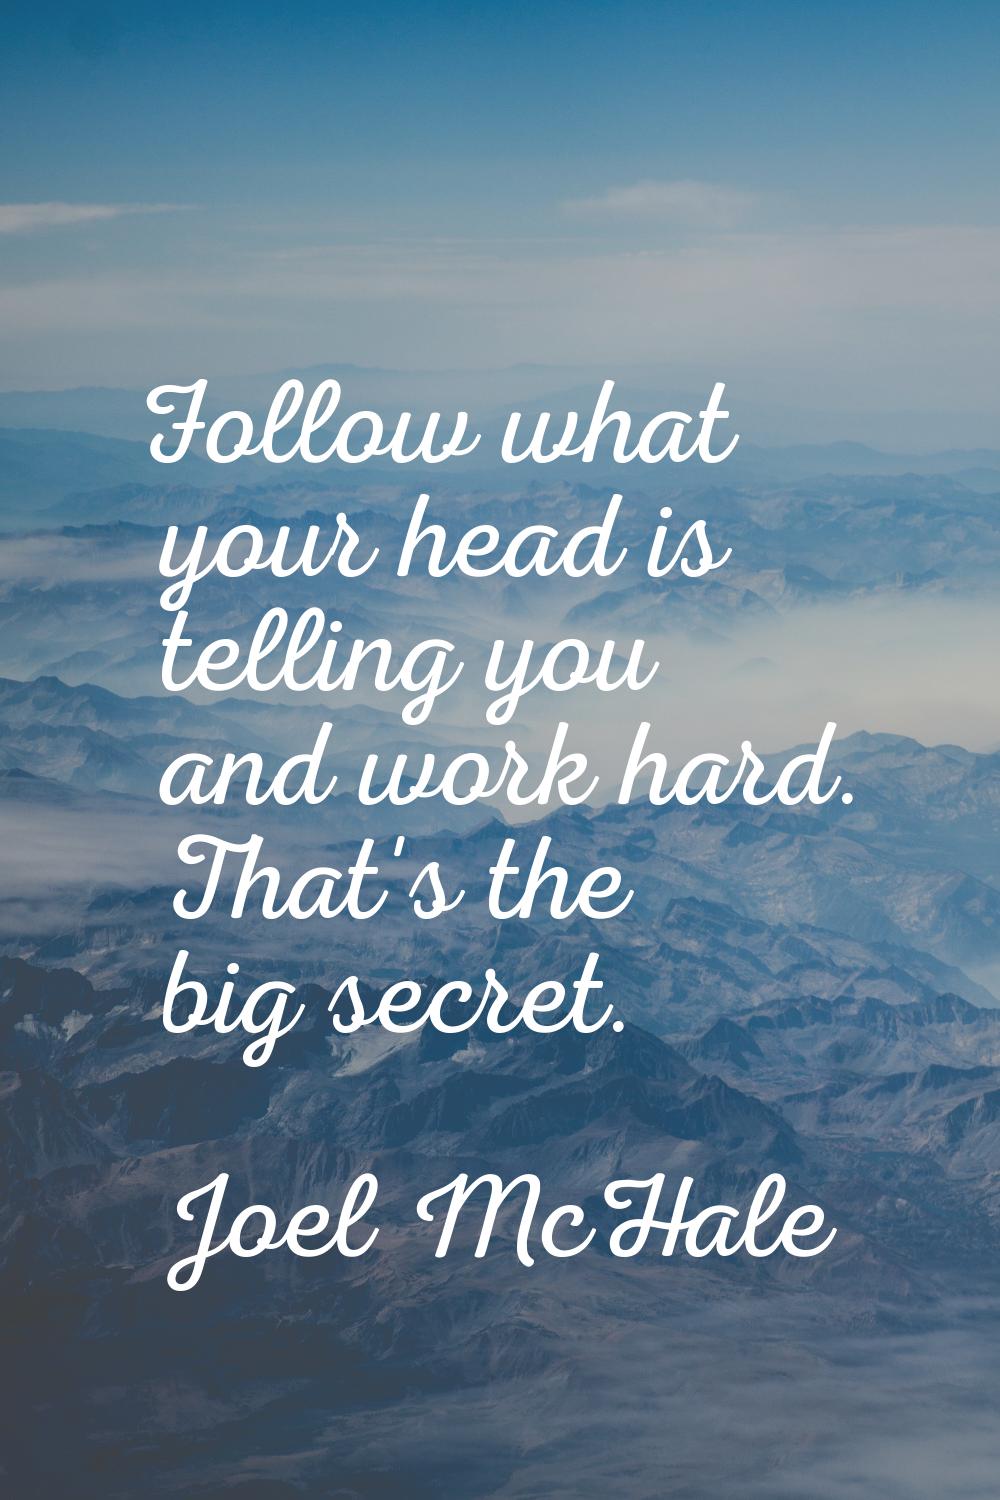 Follow what your head is telling you and work hard. That's the big secret.